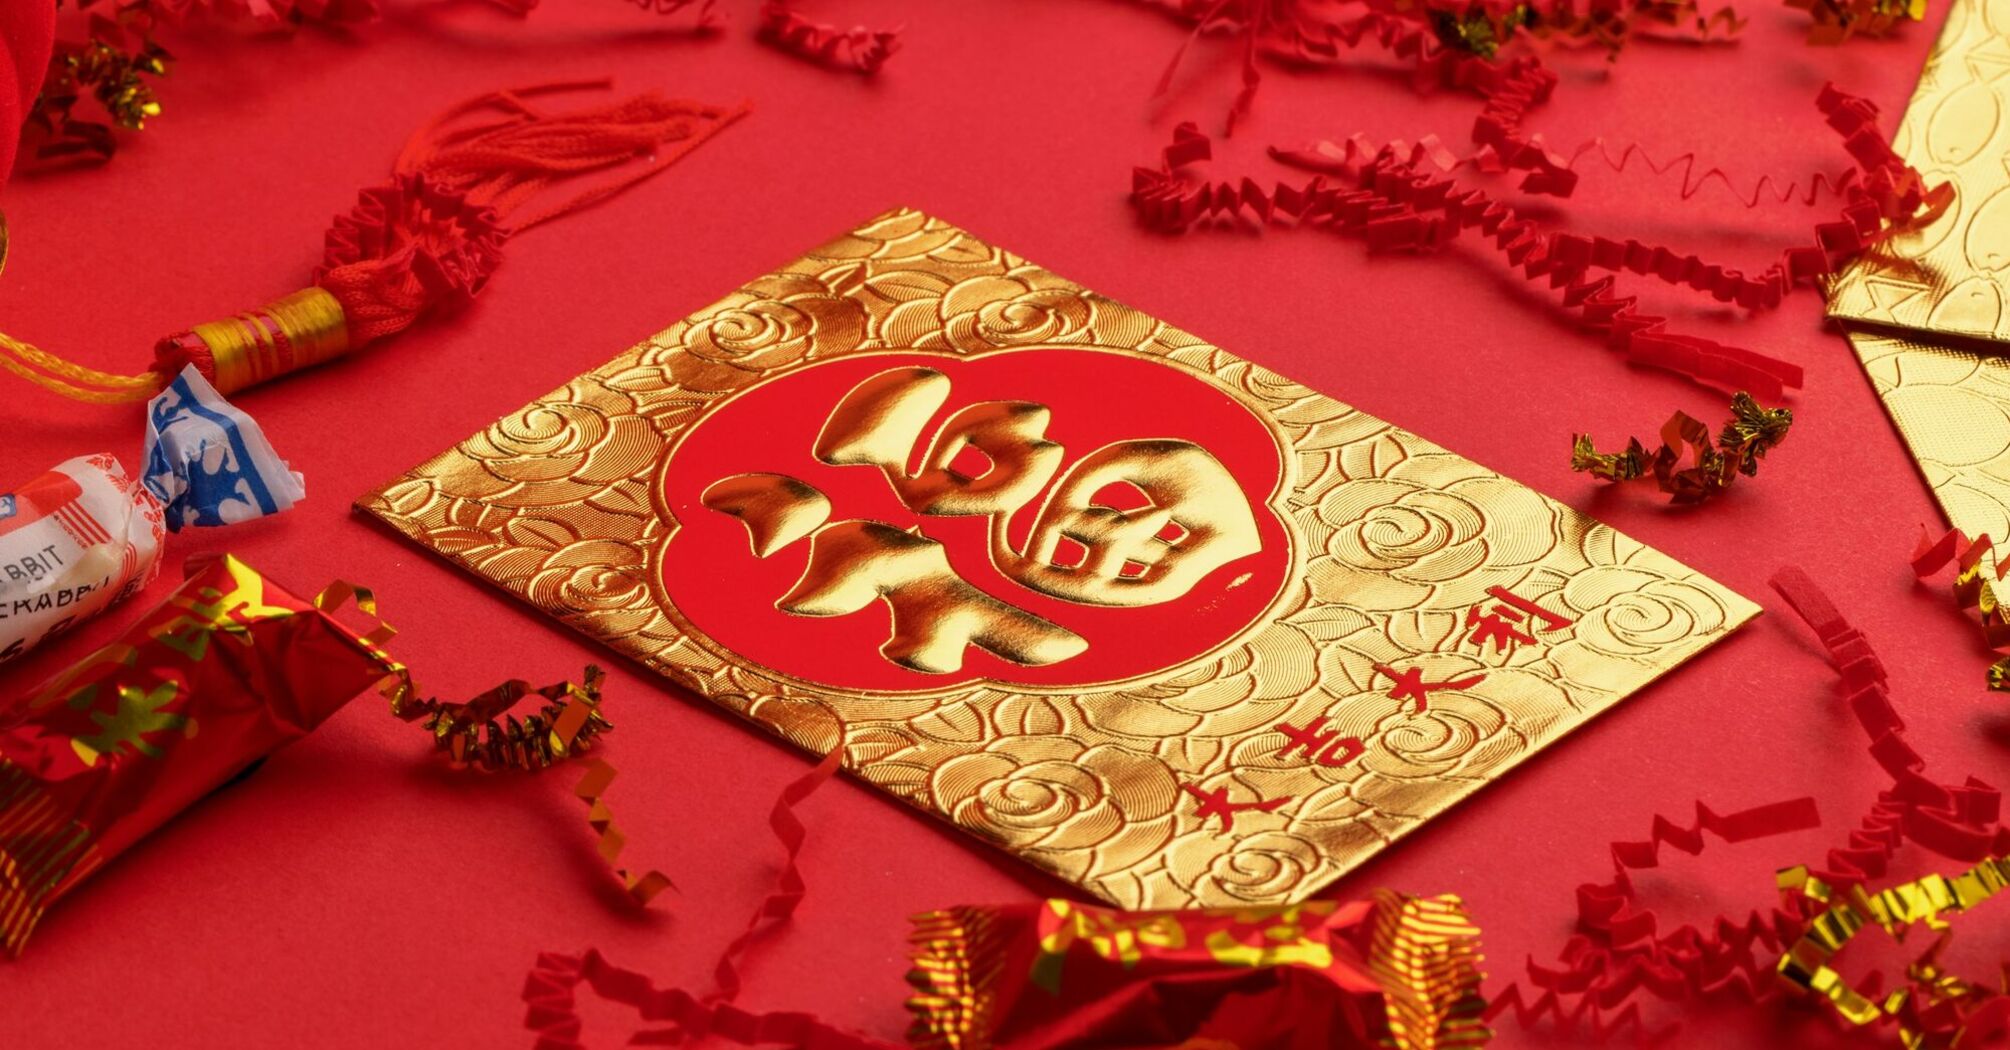 Traditional red envelopes adorned with gold Chinese characters, surrounded by red and gold festive decorations and firecracker replicas on a red background